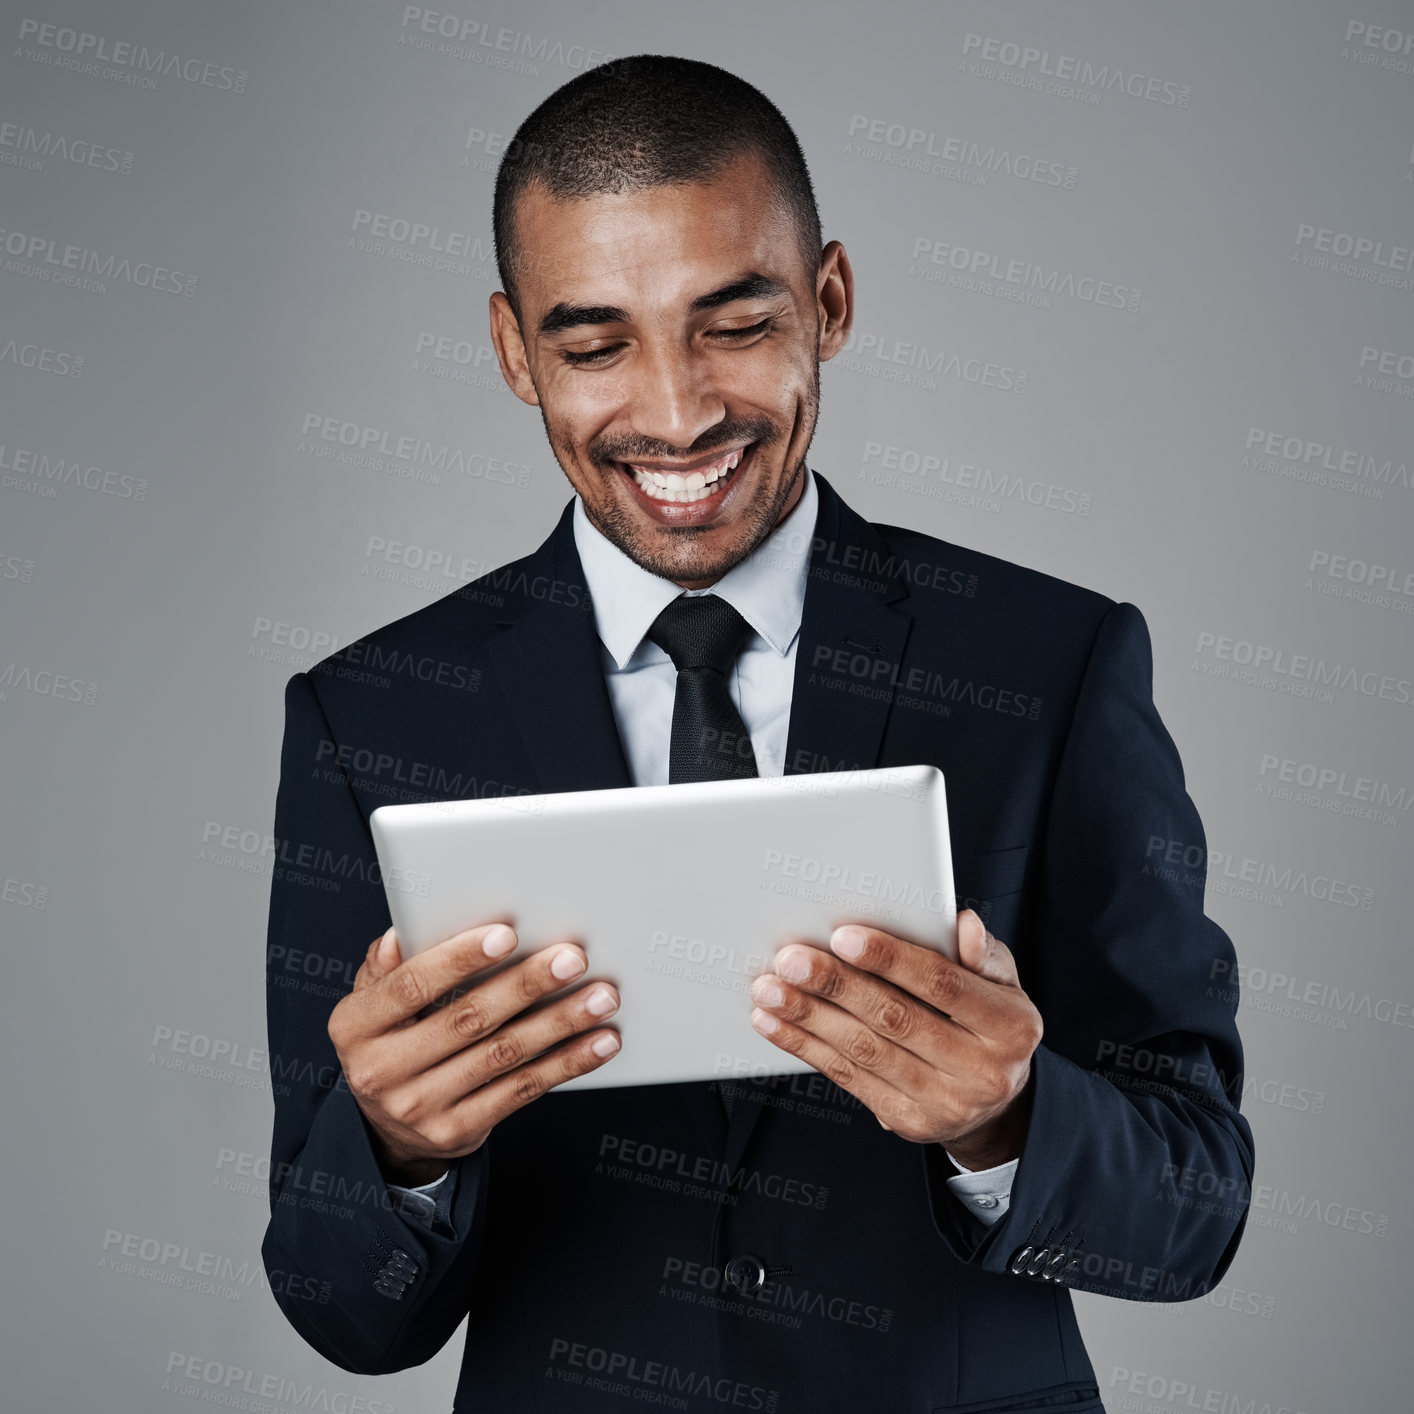 Buy stock photo Studio shot of a corporate businessman using a digital tablet against a grey background